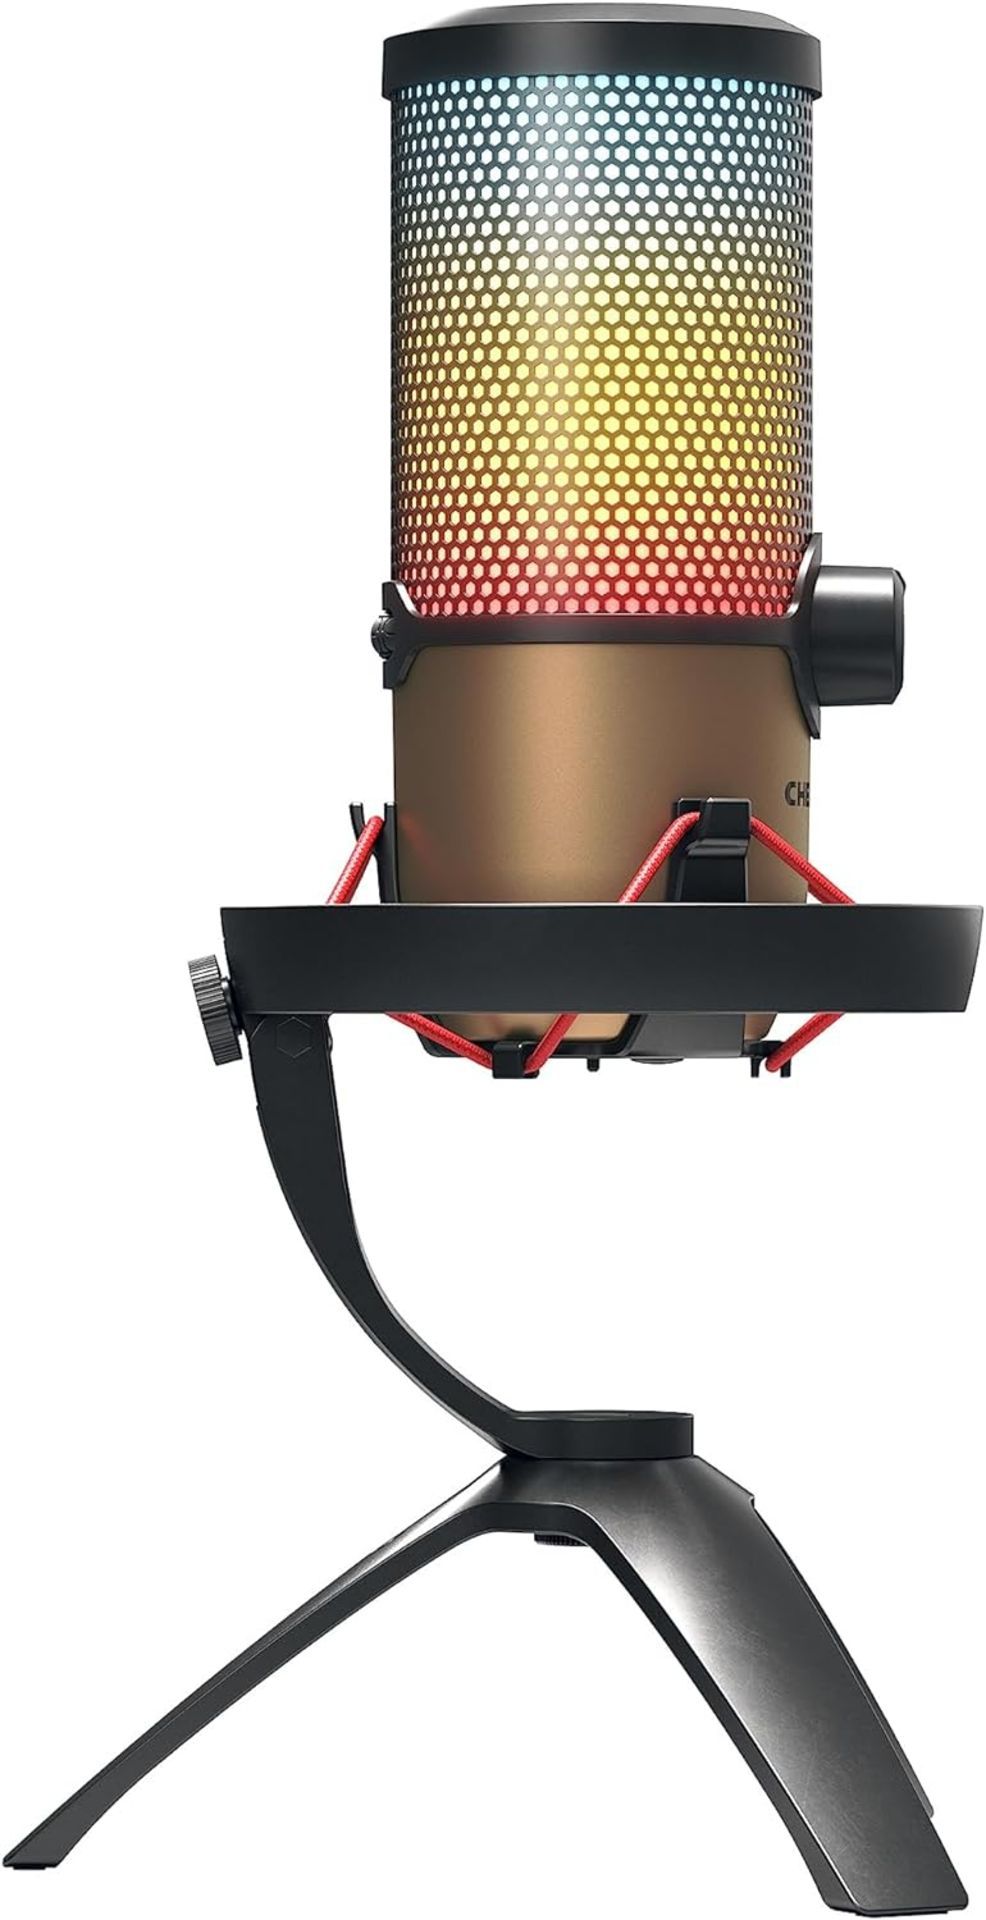 NEW & BOXED CHERRY UM 9.0 Pro RGB Black USB Desk Microphone with Shock Mount. RRP £127.99. The - Image 2 of 8